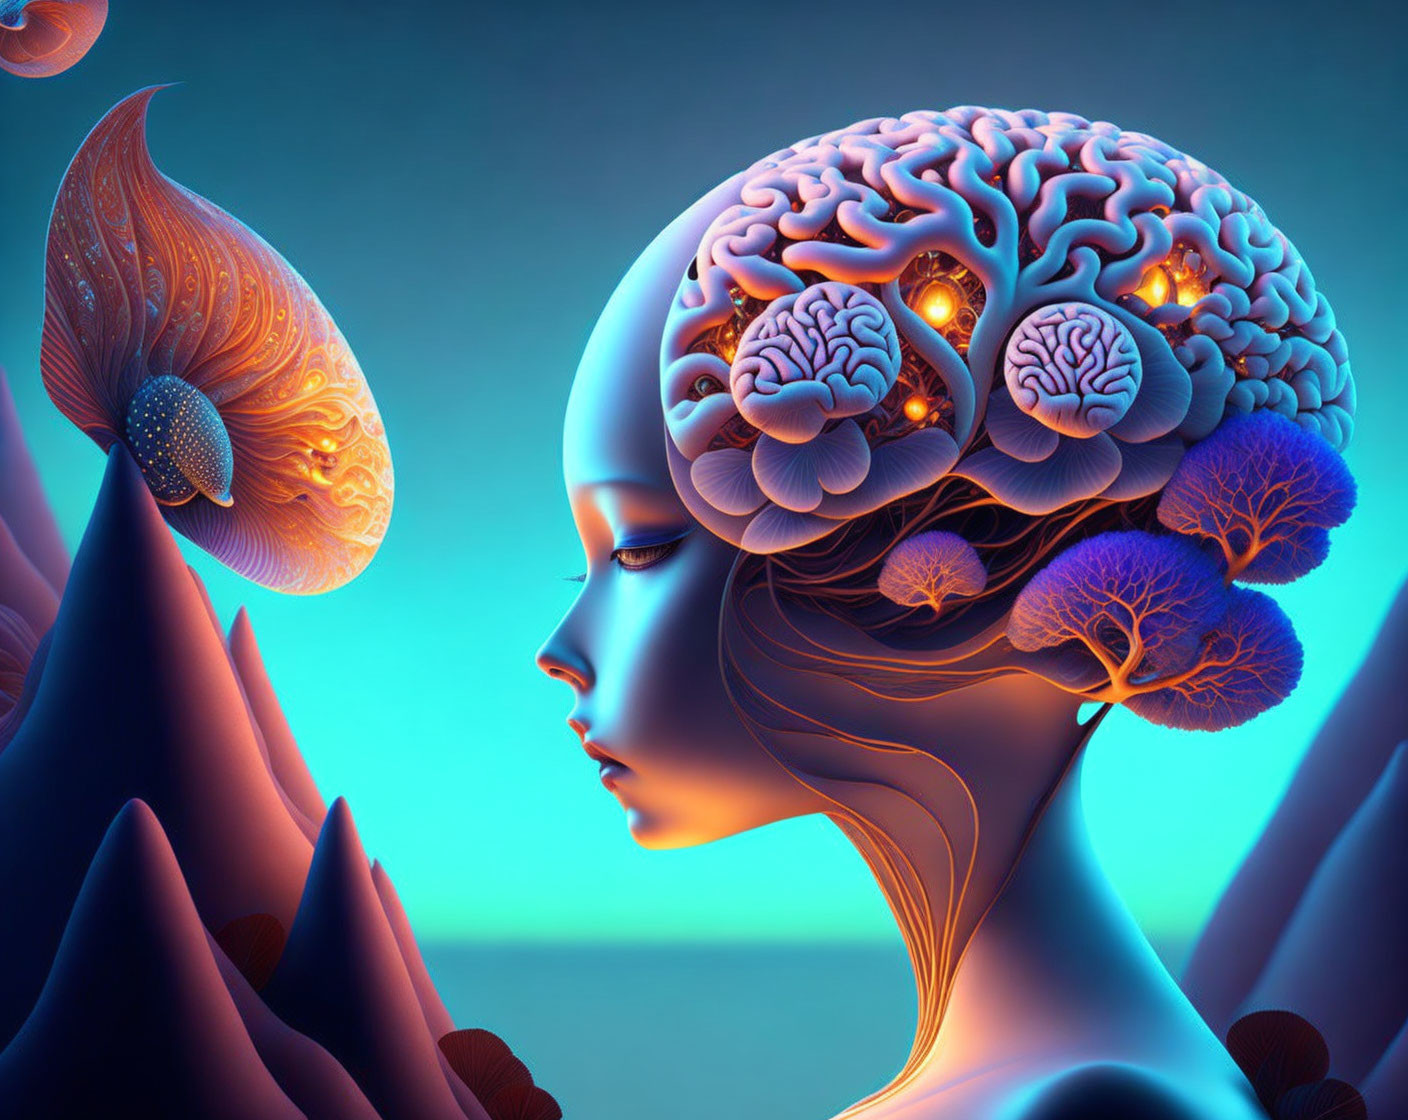 Surreal illustration of woman with exposed brain, glowing elements, flowers, fish, and mountains